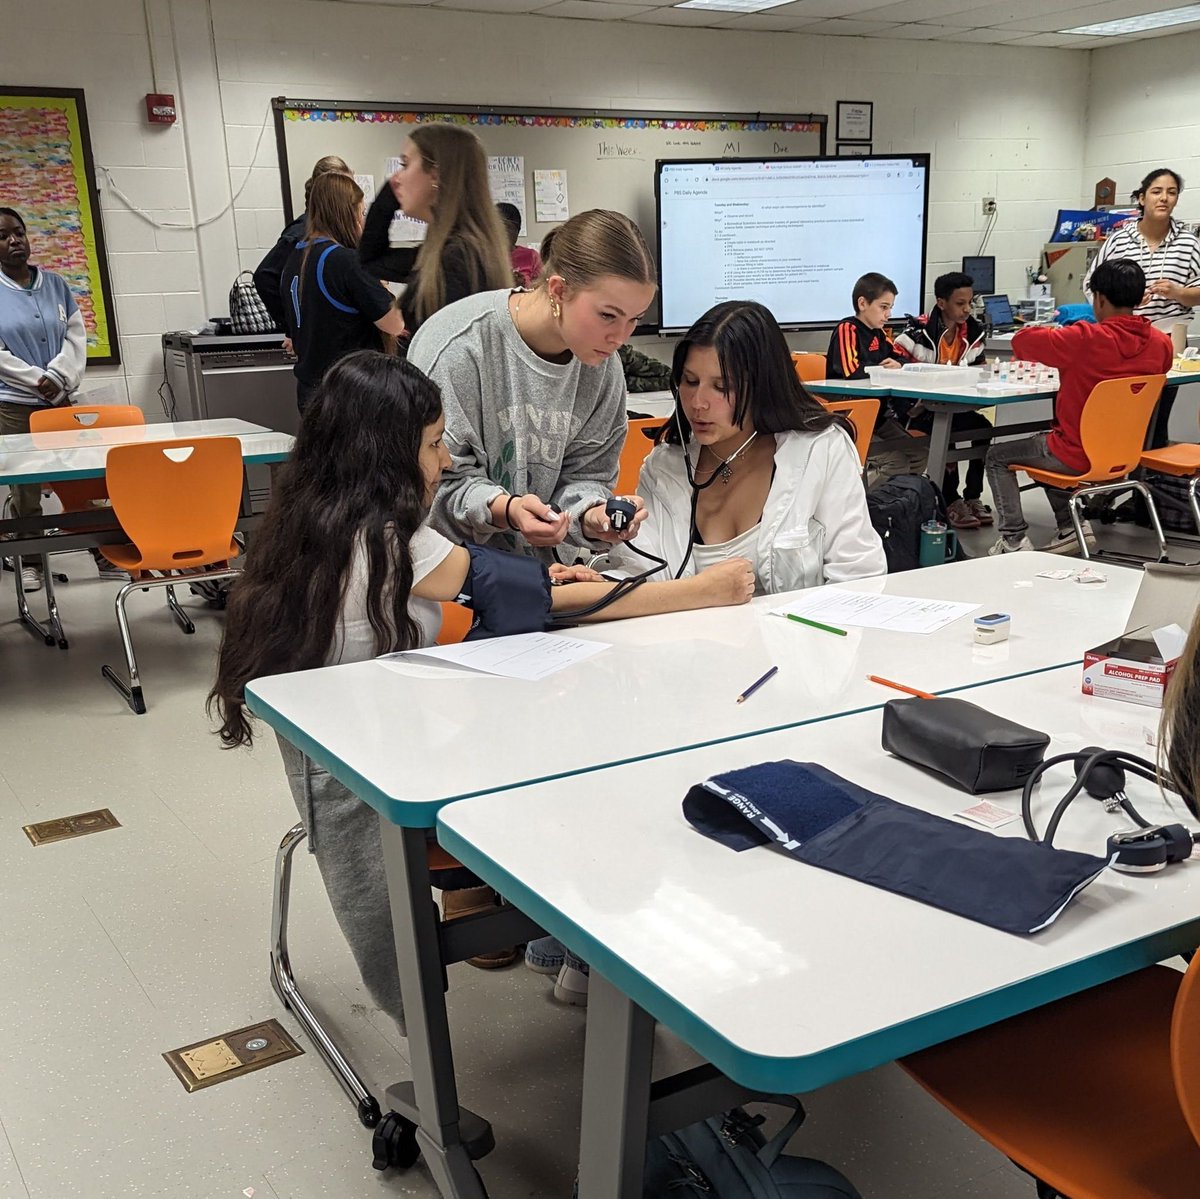 Ryle PLTW Biomedical classes recently welcomed the Medical detective students from Jones Middle School for the day. Students had the opportunity to engage in hands-on learning activities and explore the field of biomedical science.